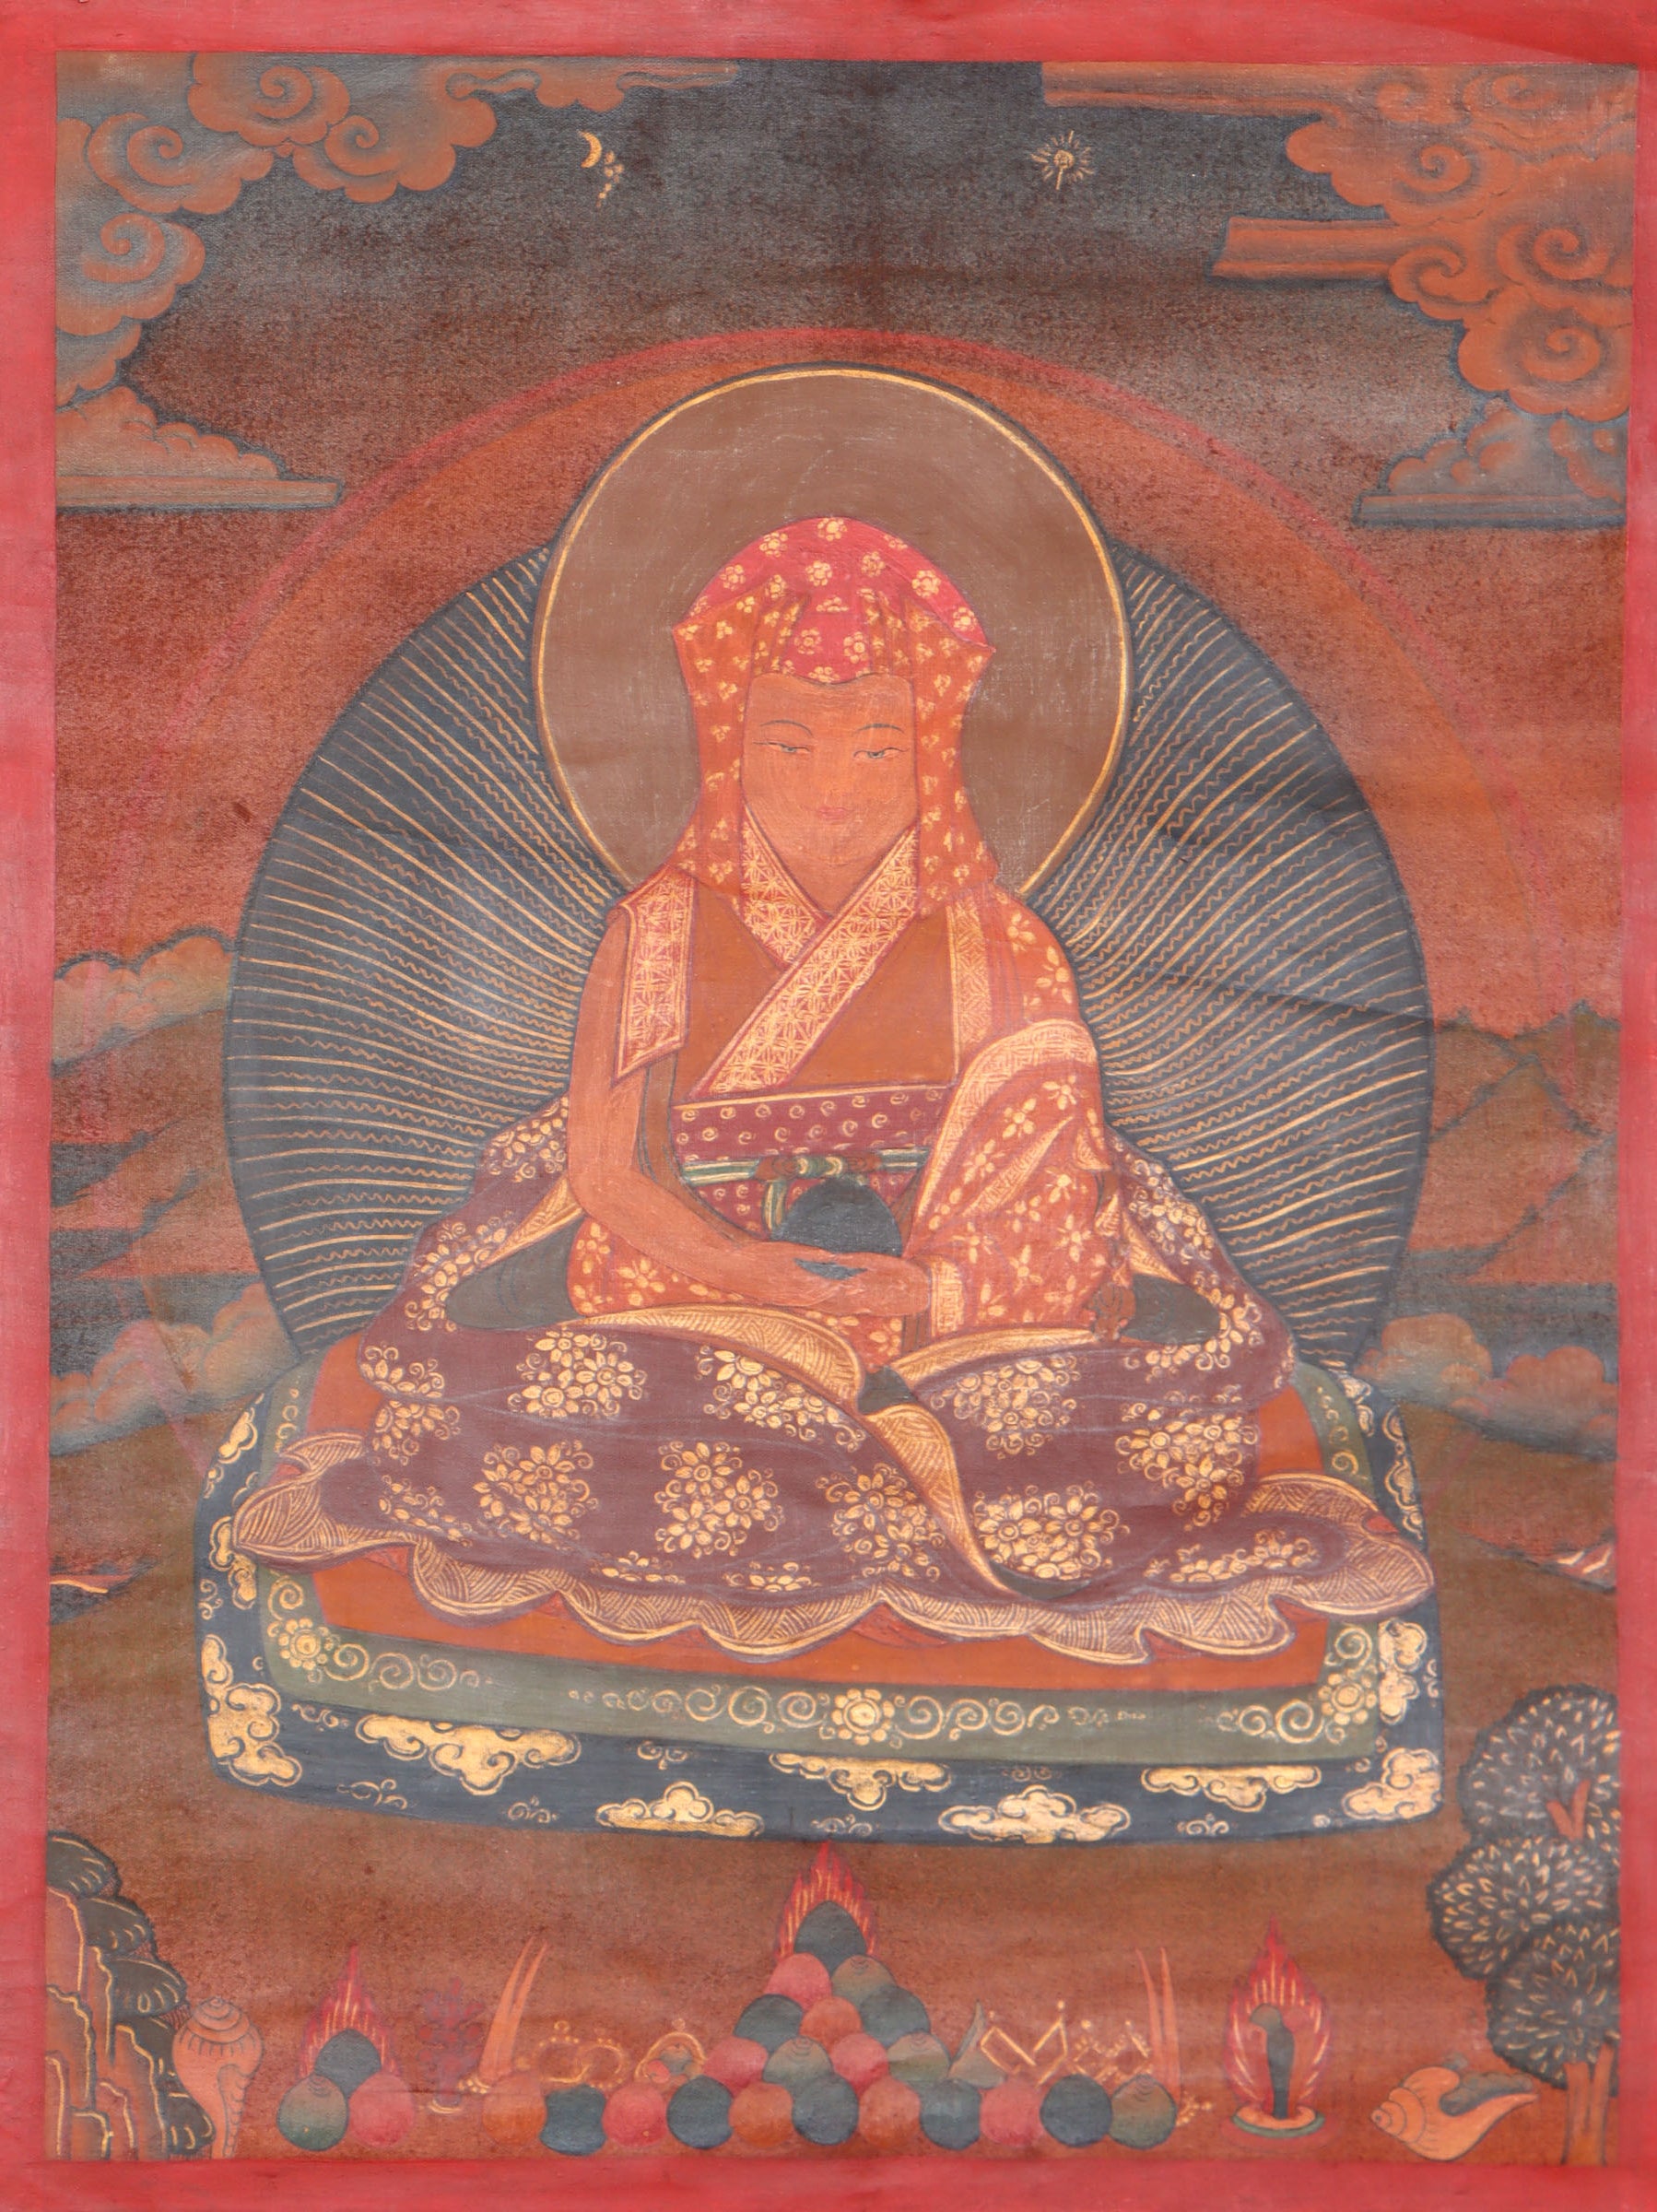 Antique Karmapa Thangka Painting for wisdom and compassion.